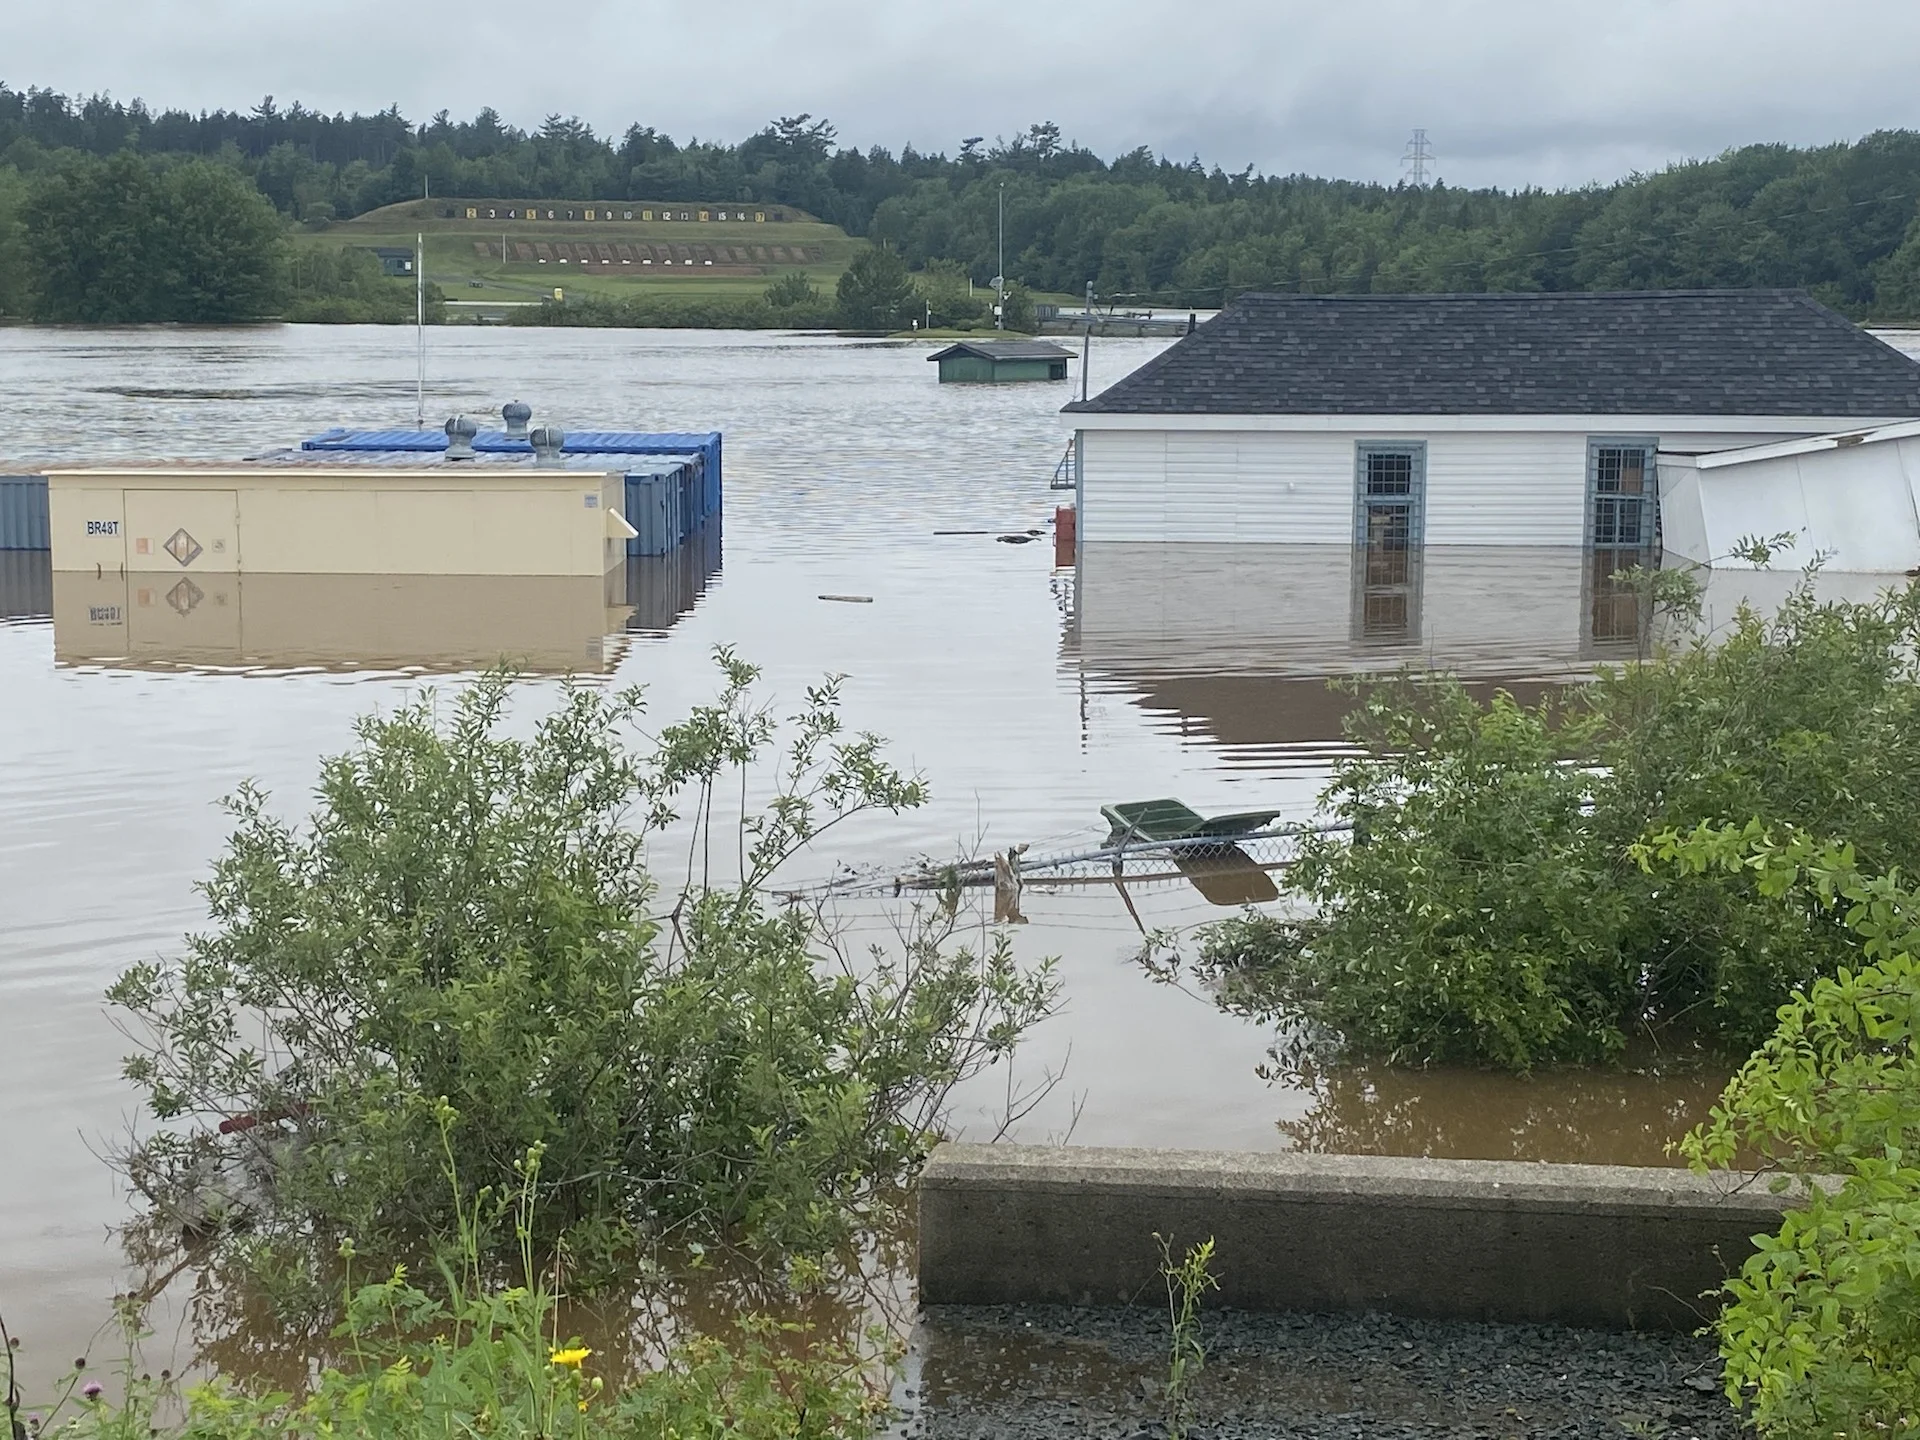 Remains of 2 missing children found after N.S. flood, RCMP say